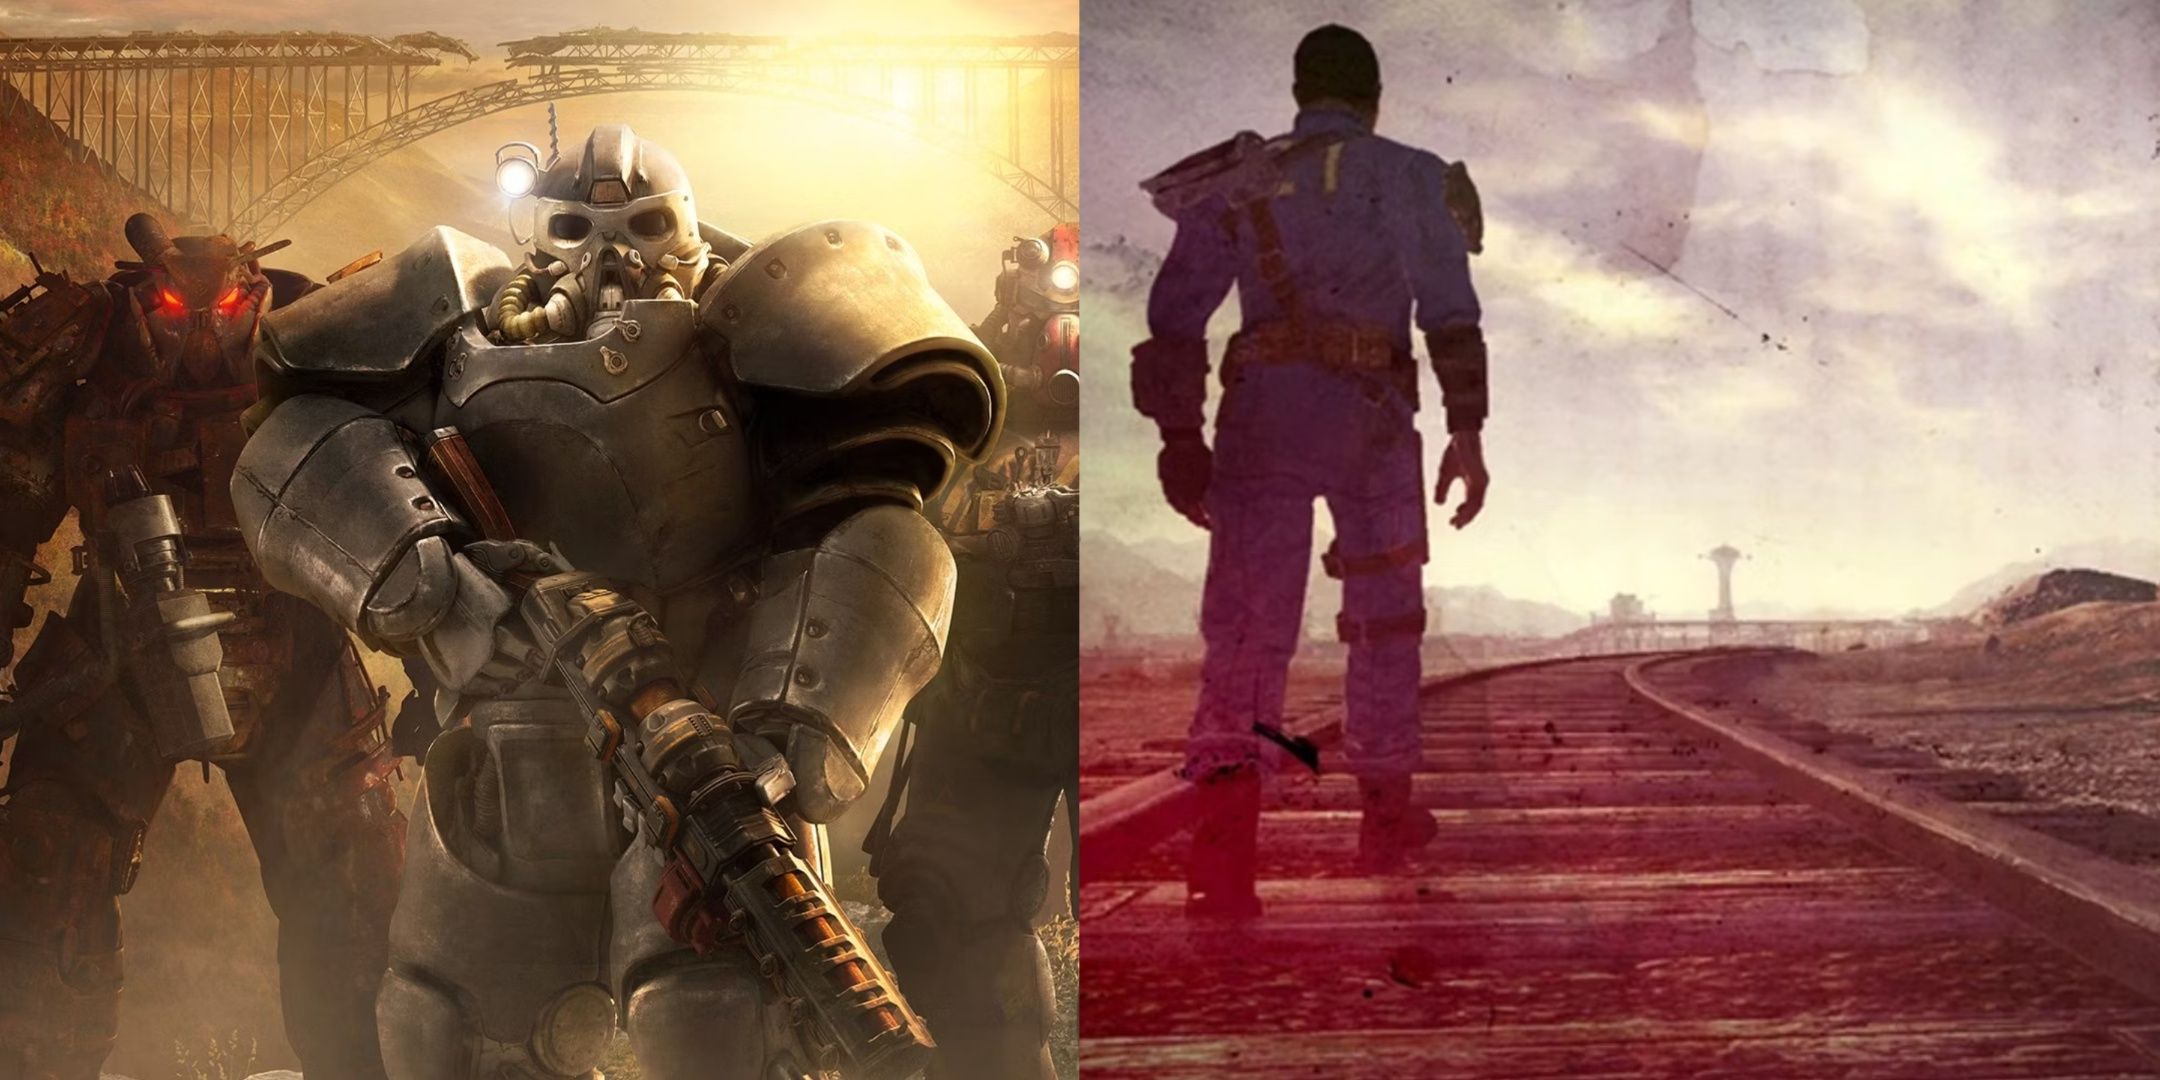 Fallout 76 power armor key art and the Courier in an ending picture from Fallout New Vegas